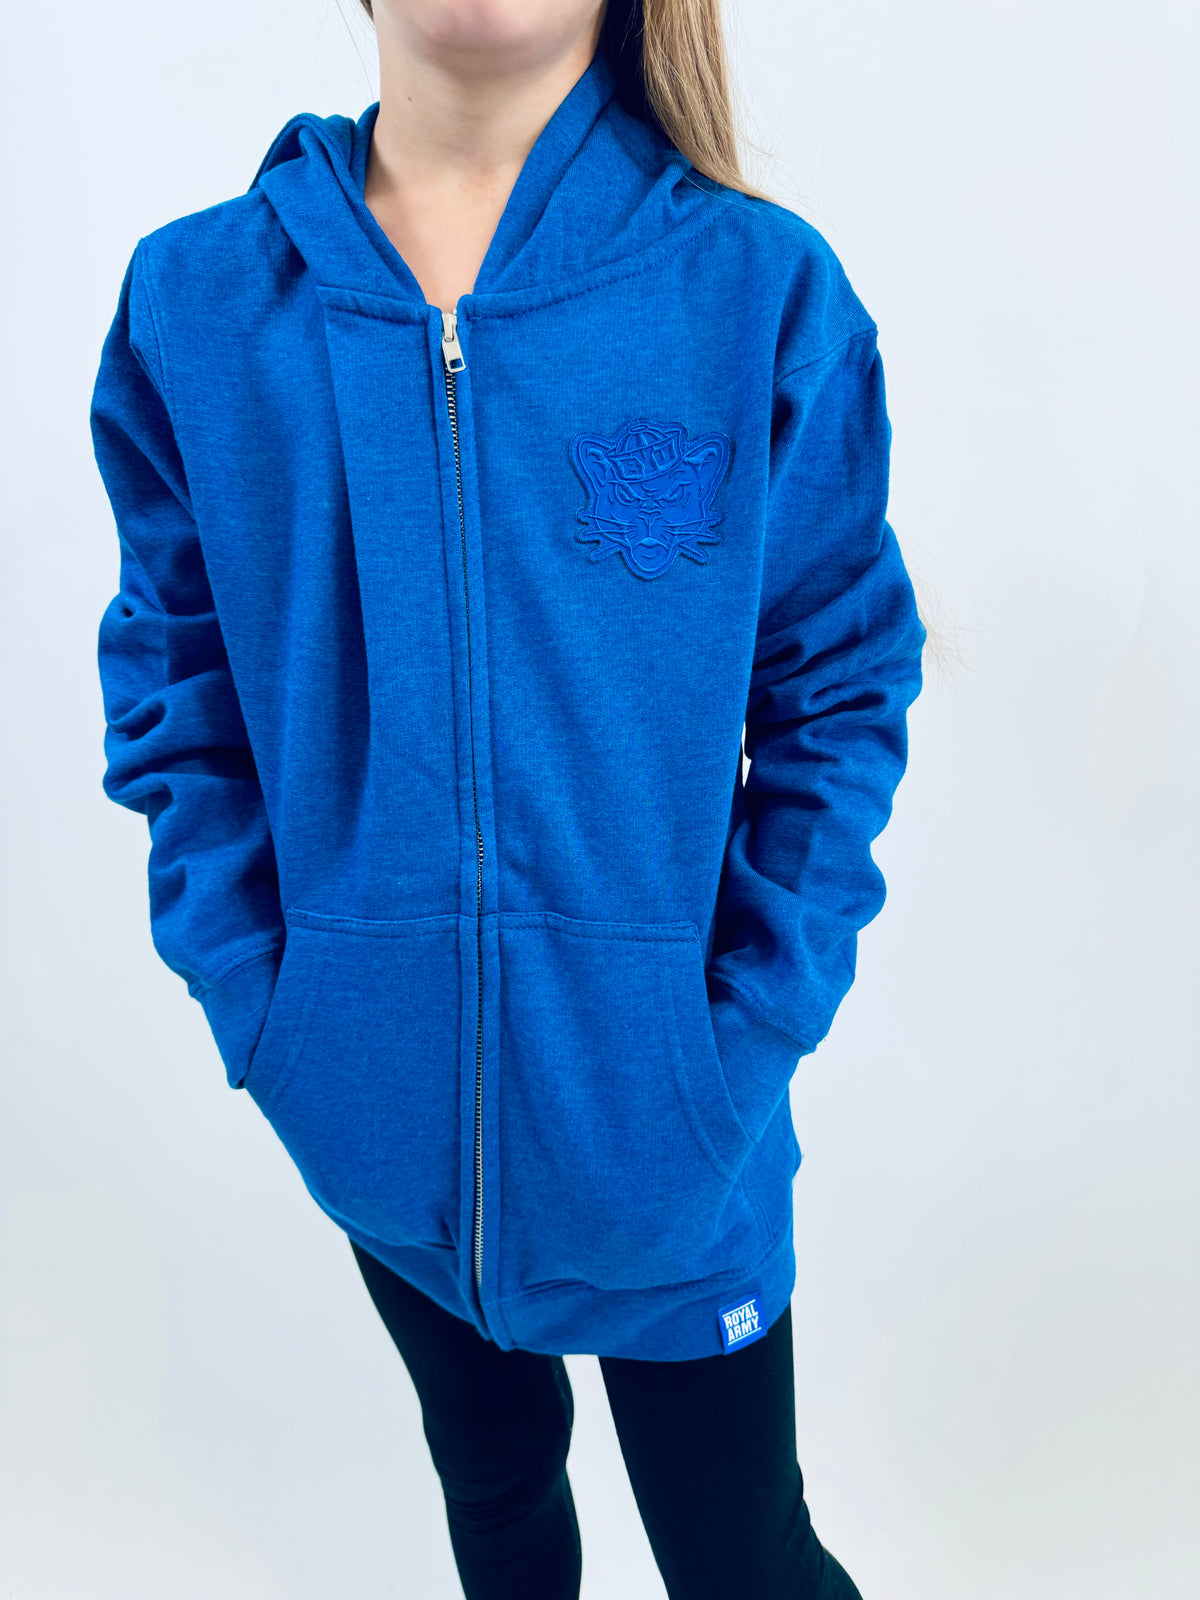 Kids Royal Blue Full-zip with Custom BYU Sailor Cougar Patch